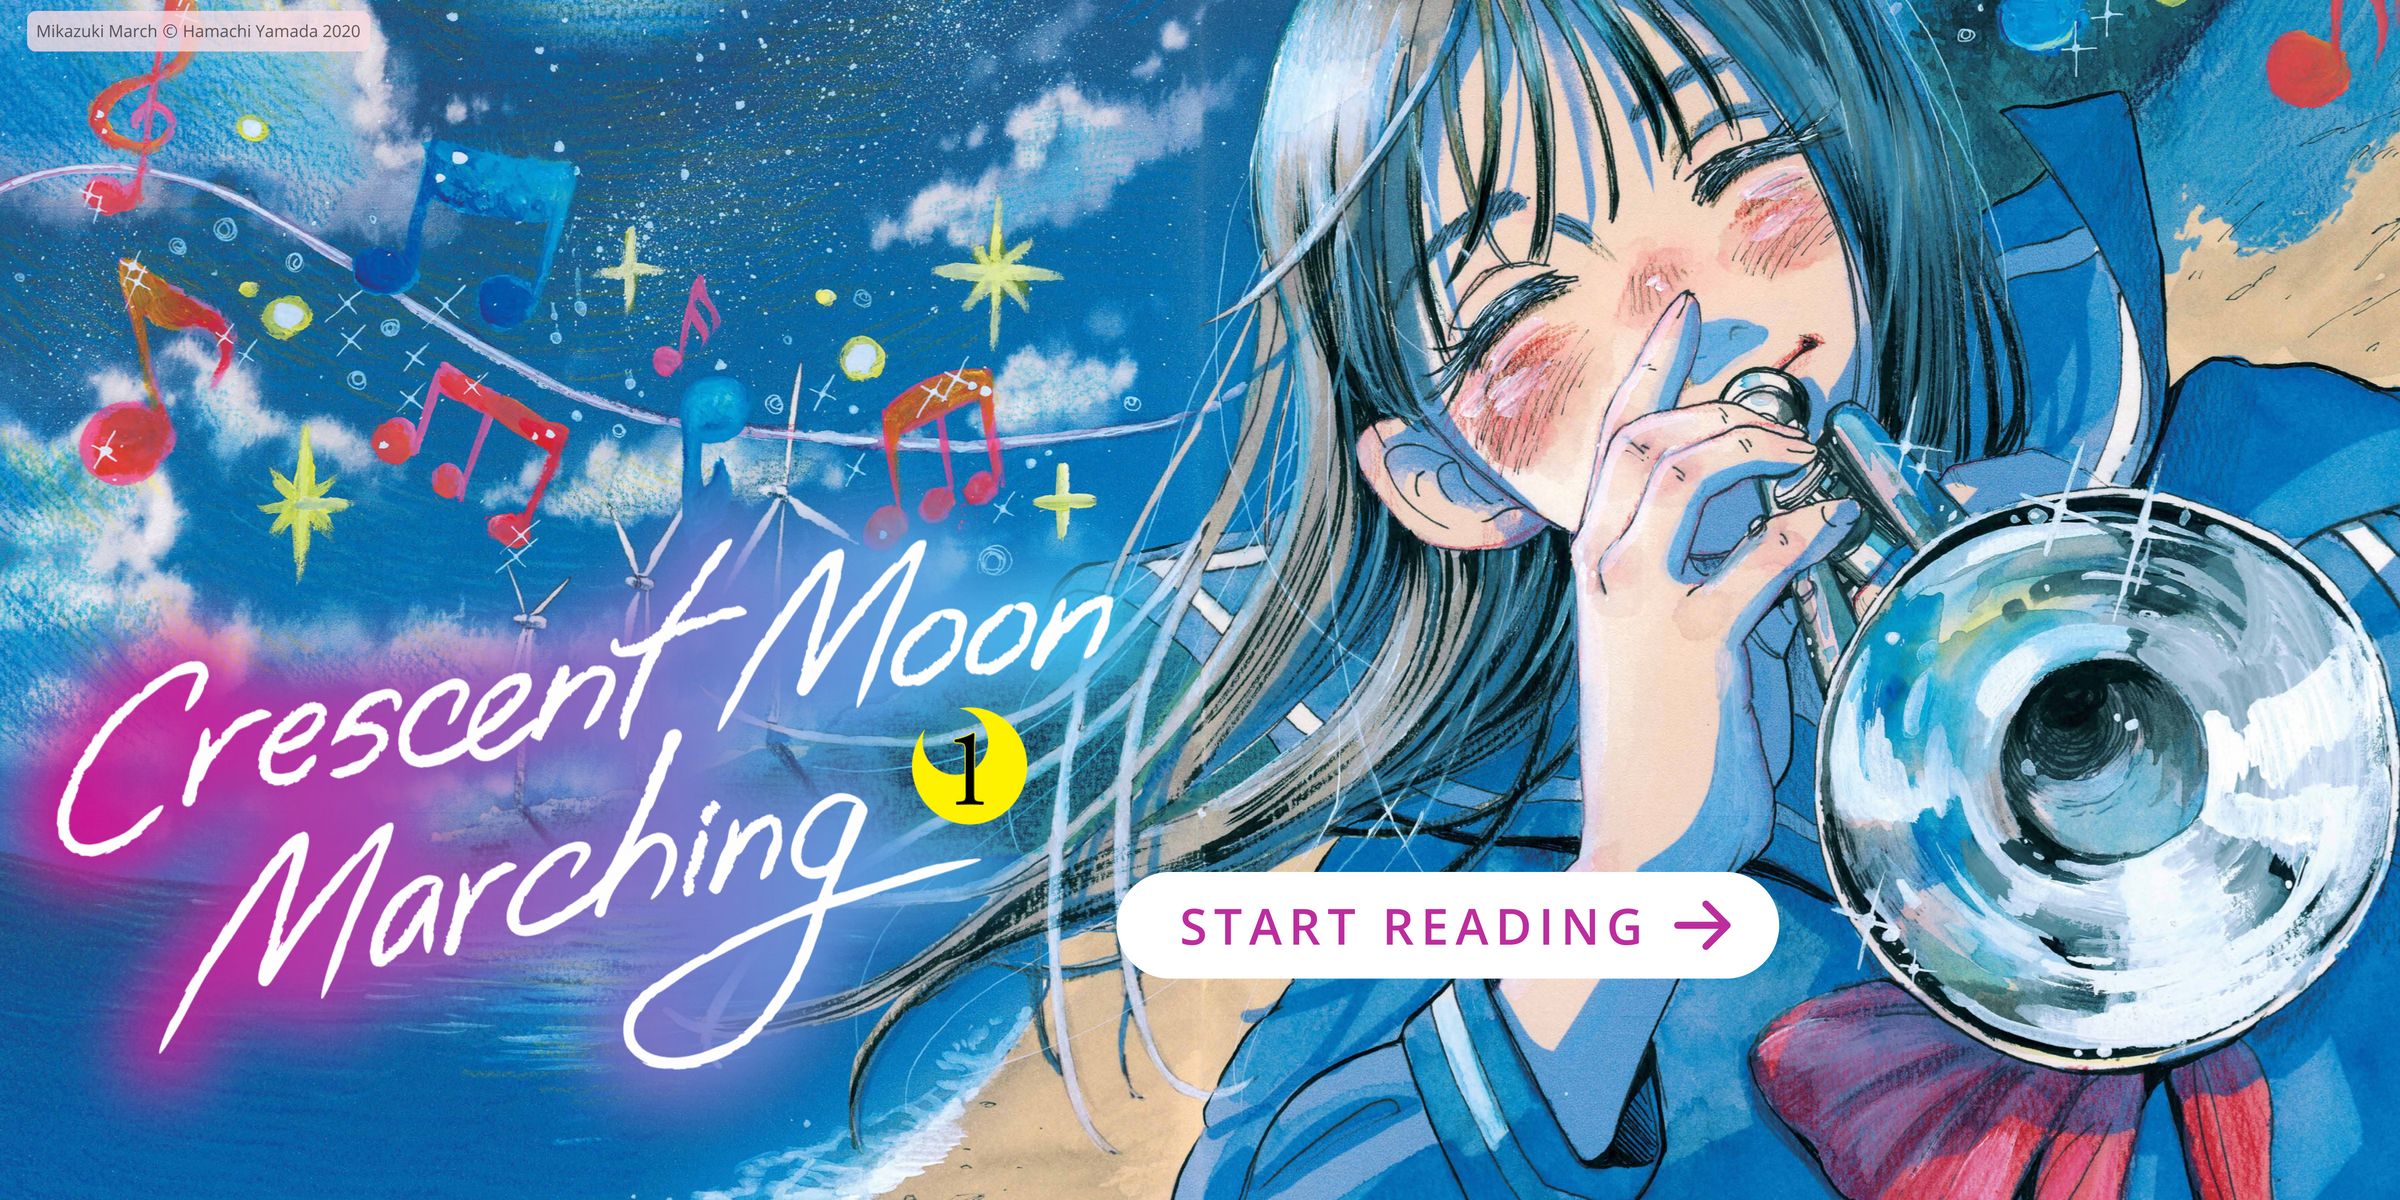 A high school girl playing a trumpet on the beach at night. Crescent Moon Marching. Start Reading.